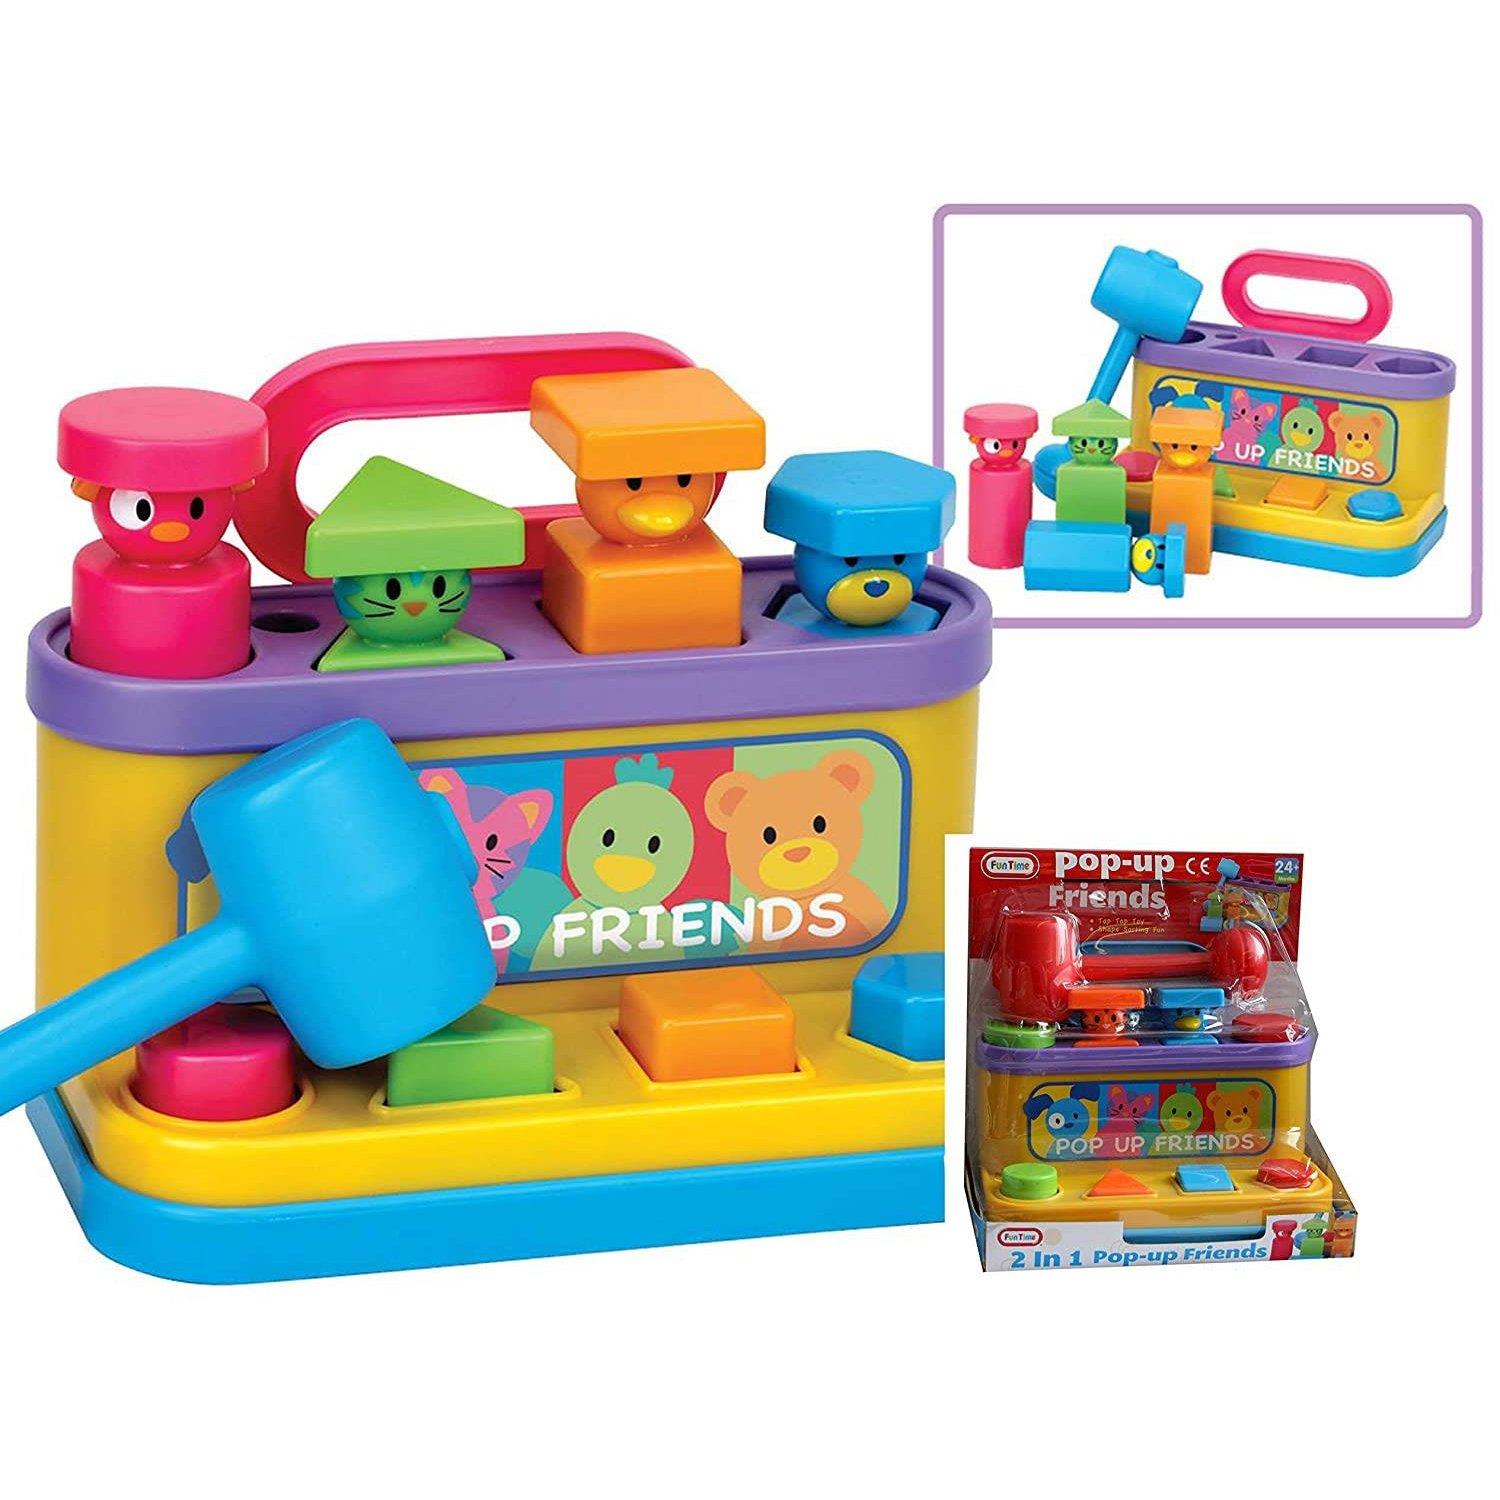 Multi-coloured Pop Up Friends with Hammer by The Magic Toy Shop - The Magic Toy Shop